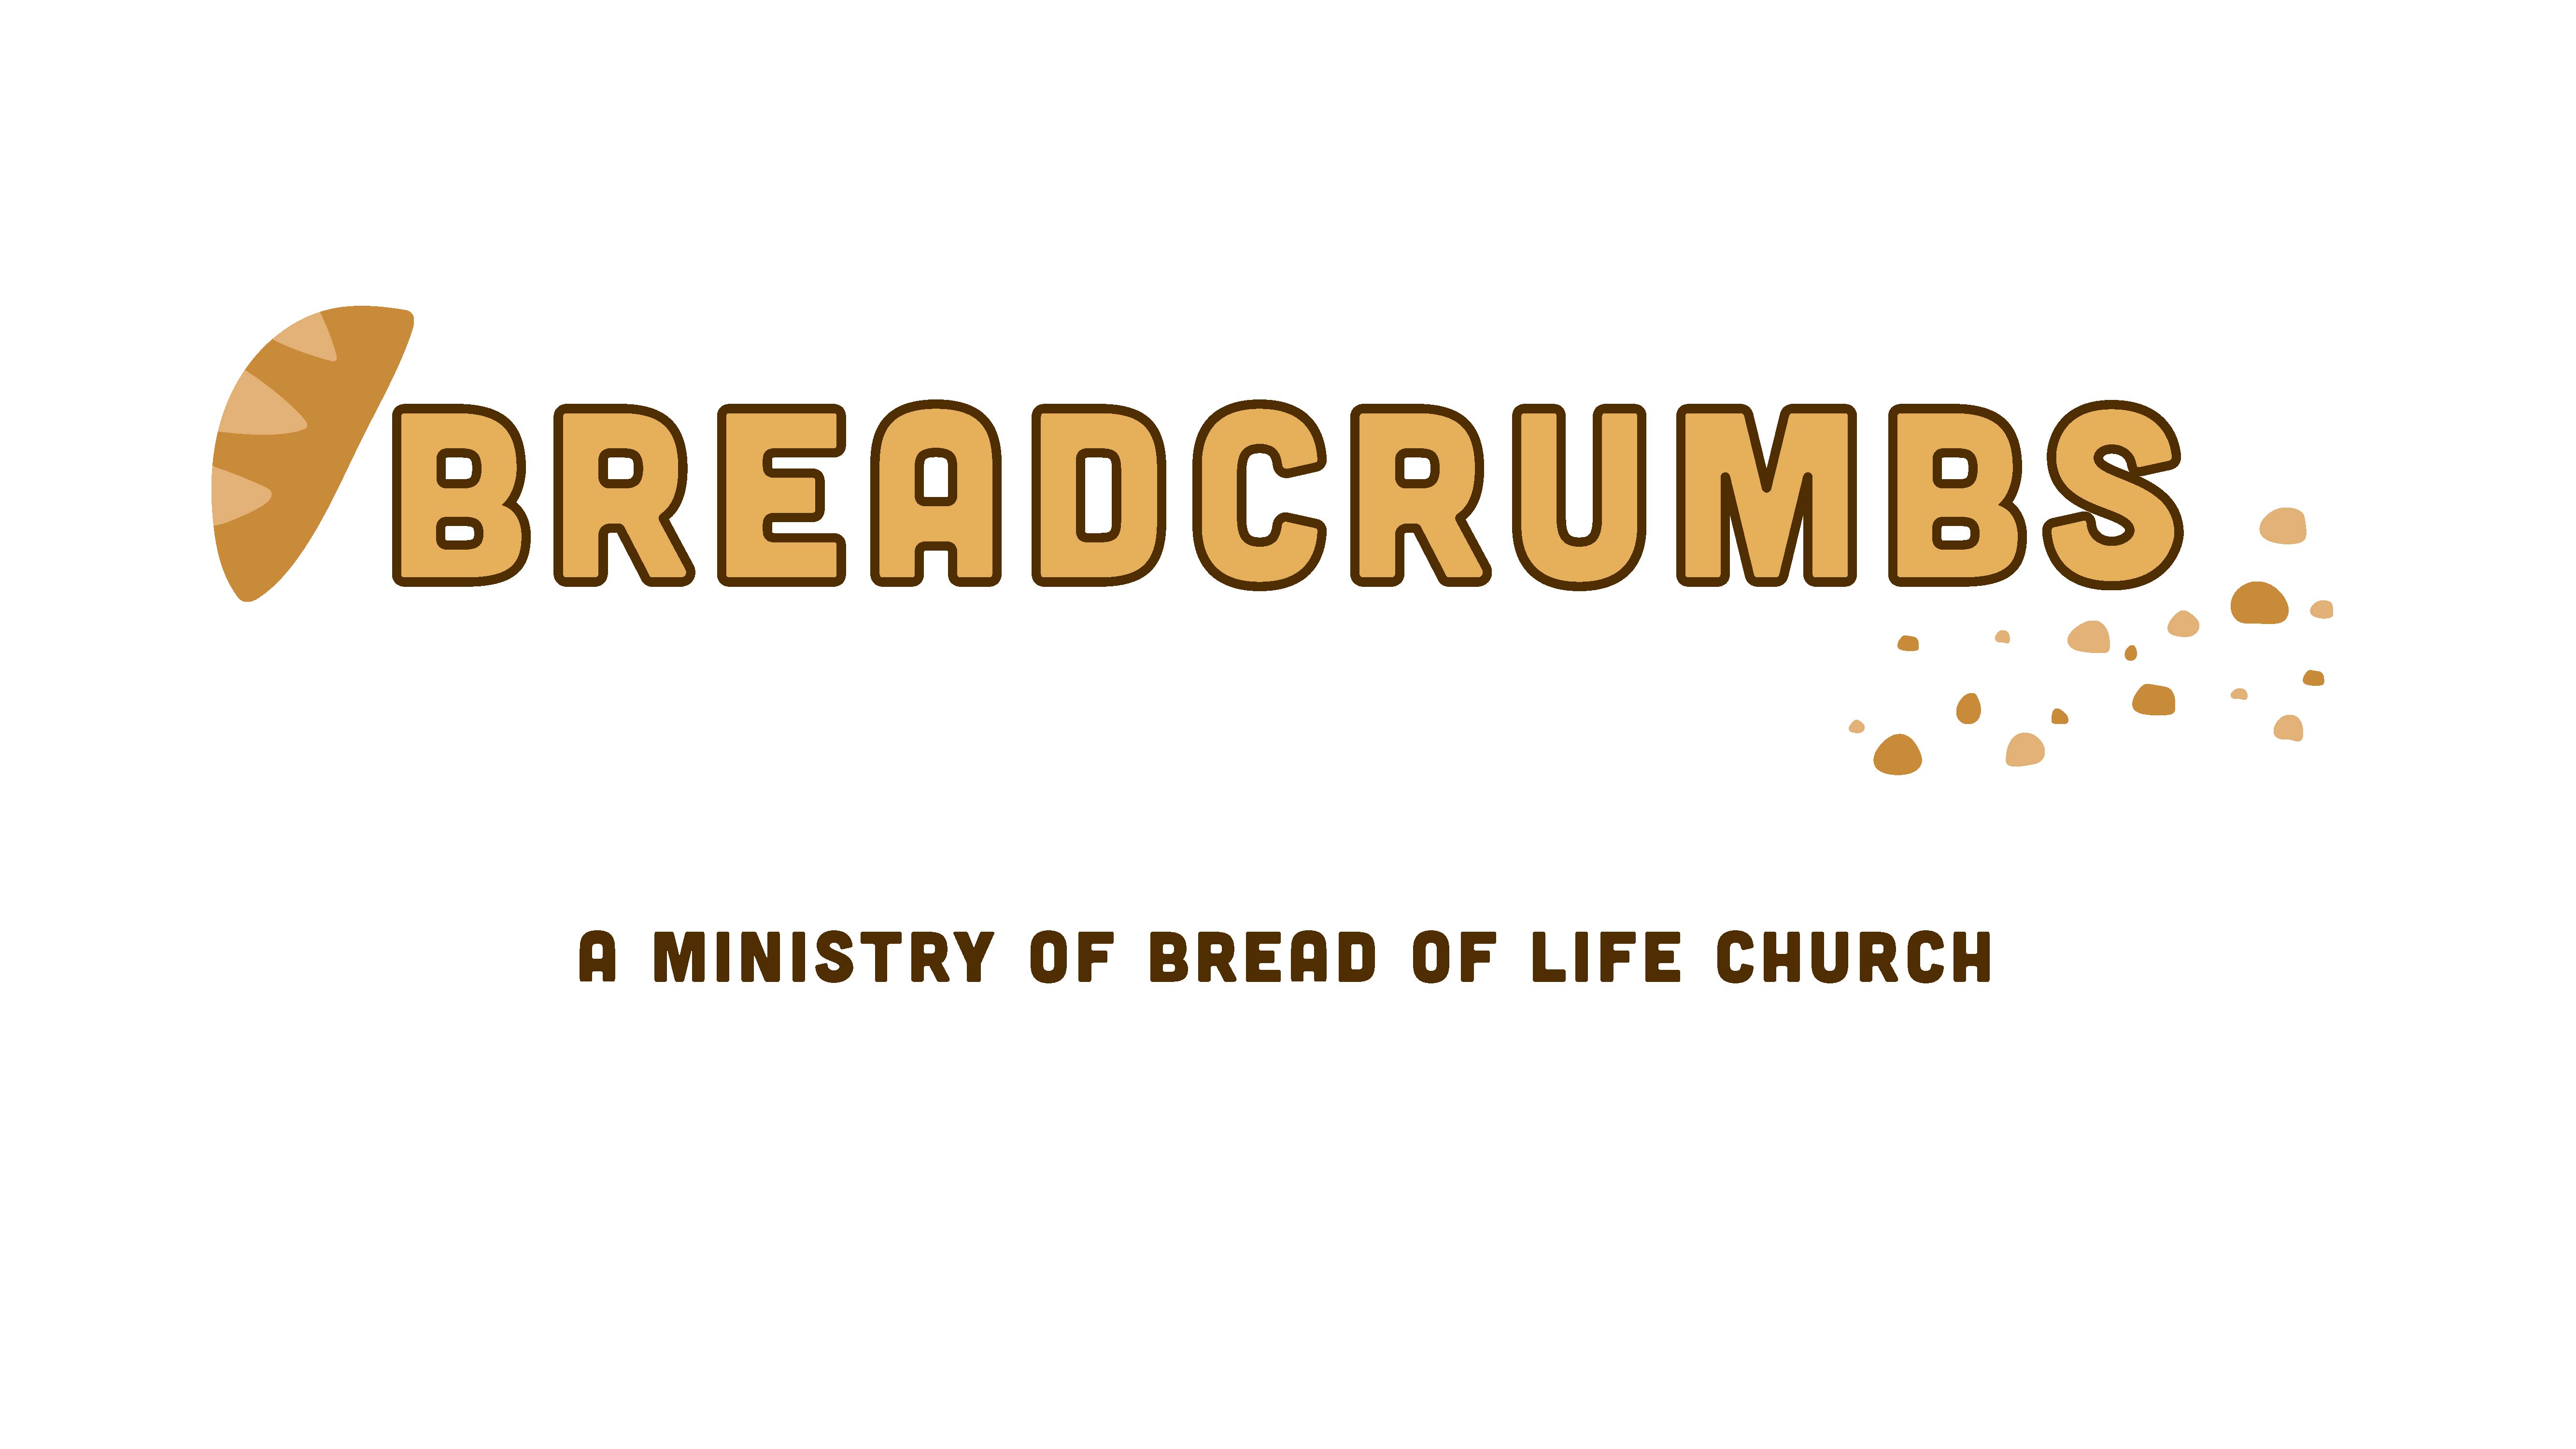 You are currently viewing Breadcrumbs in January